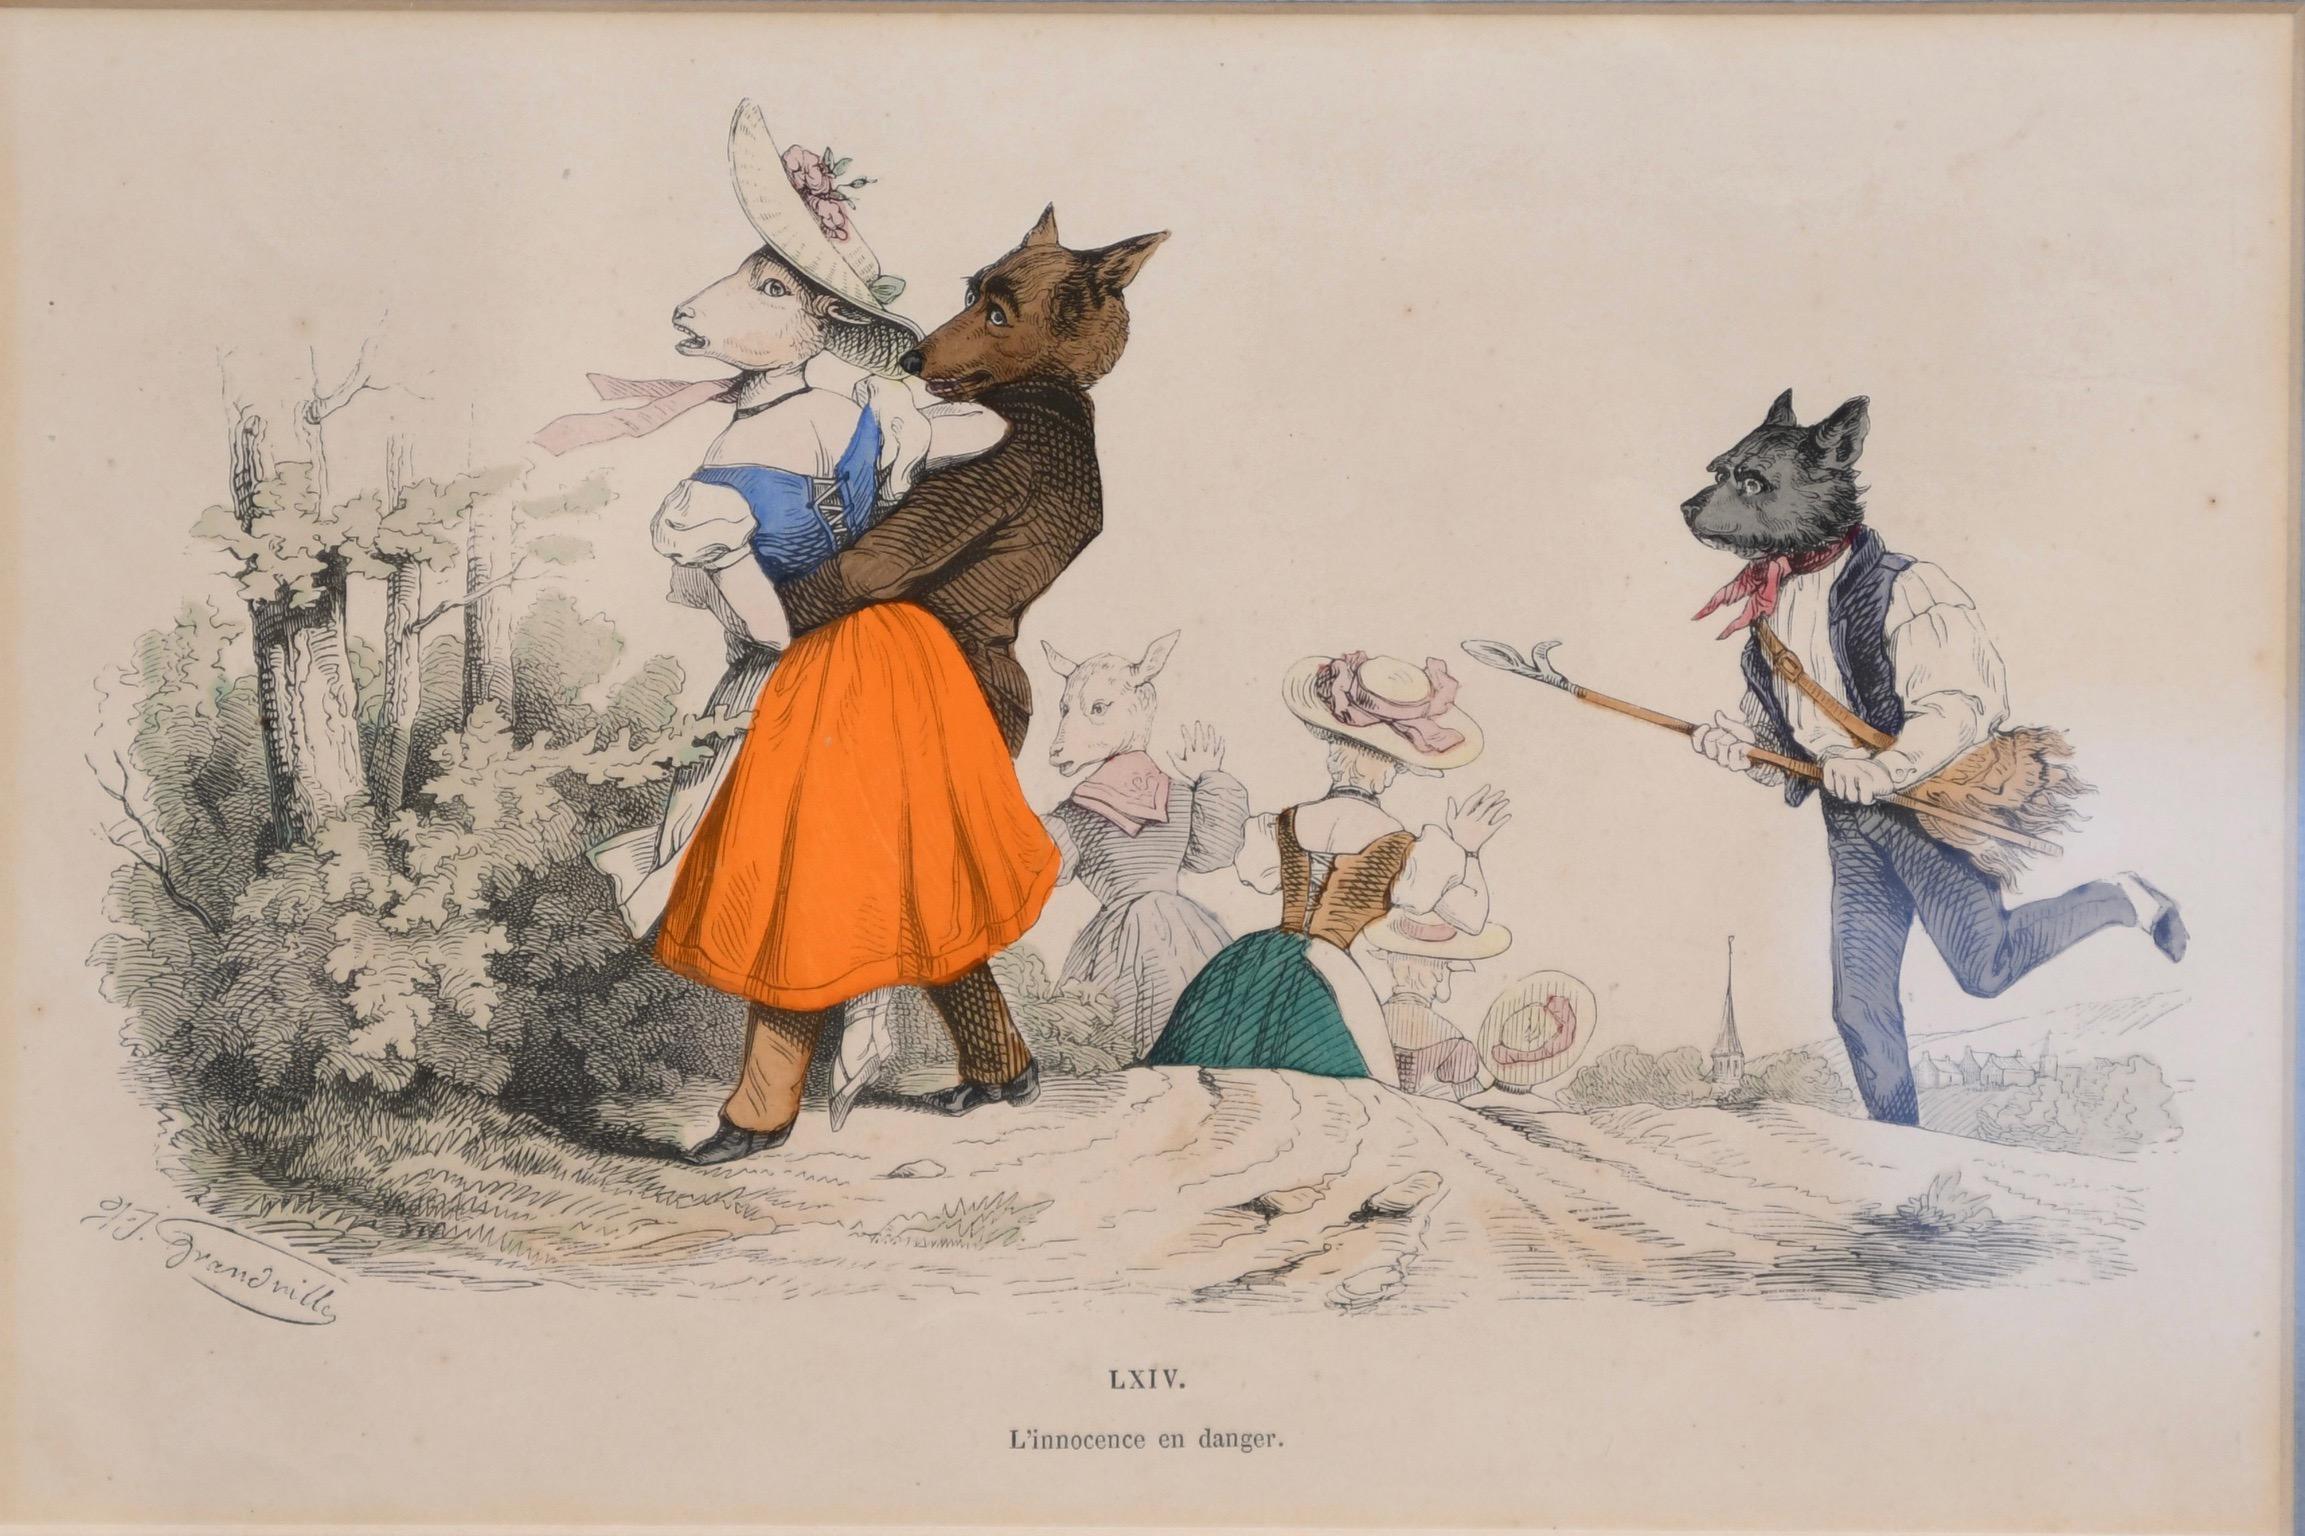 19th century French hand-colored engraving after Grandville, titled and numbered LXIV. L'innocence en danger, signed in engraving FJ. Grandville. One other engraving available in similar frame with different colored mat, titled LVII. Un enlevement,